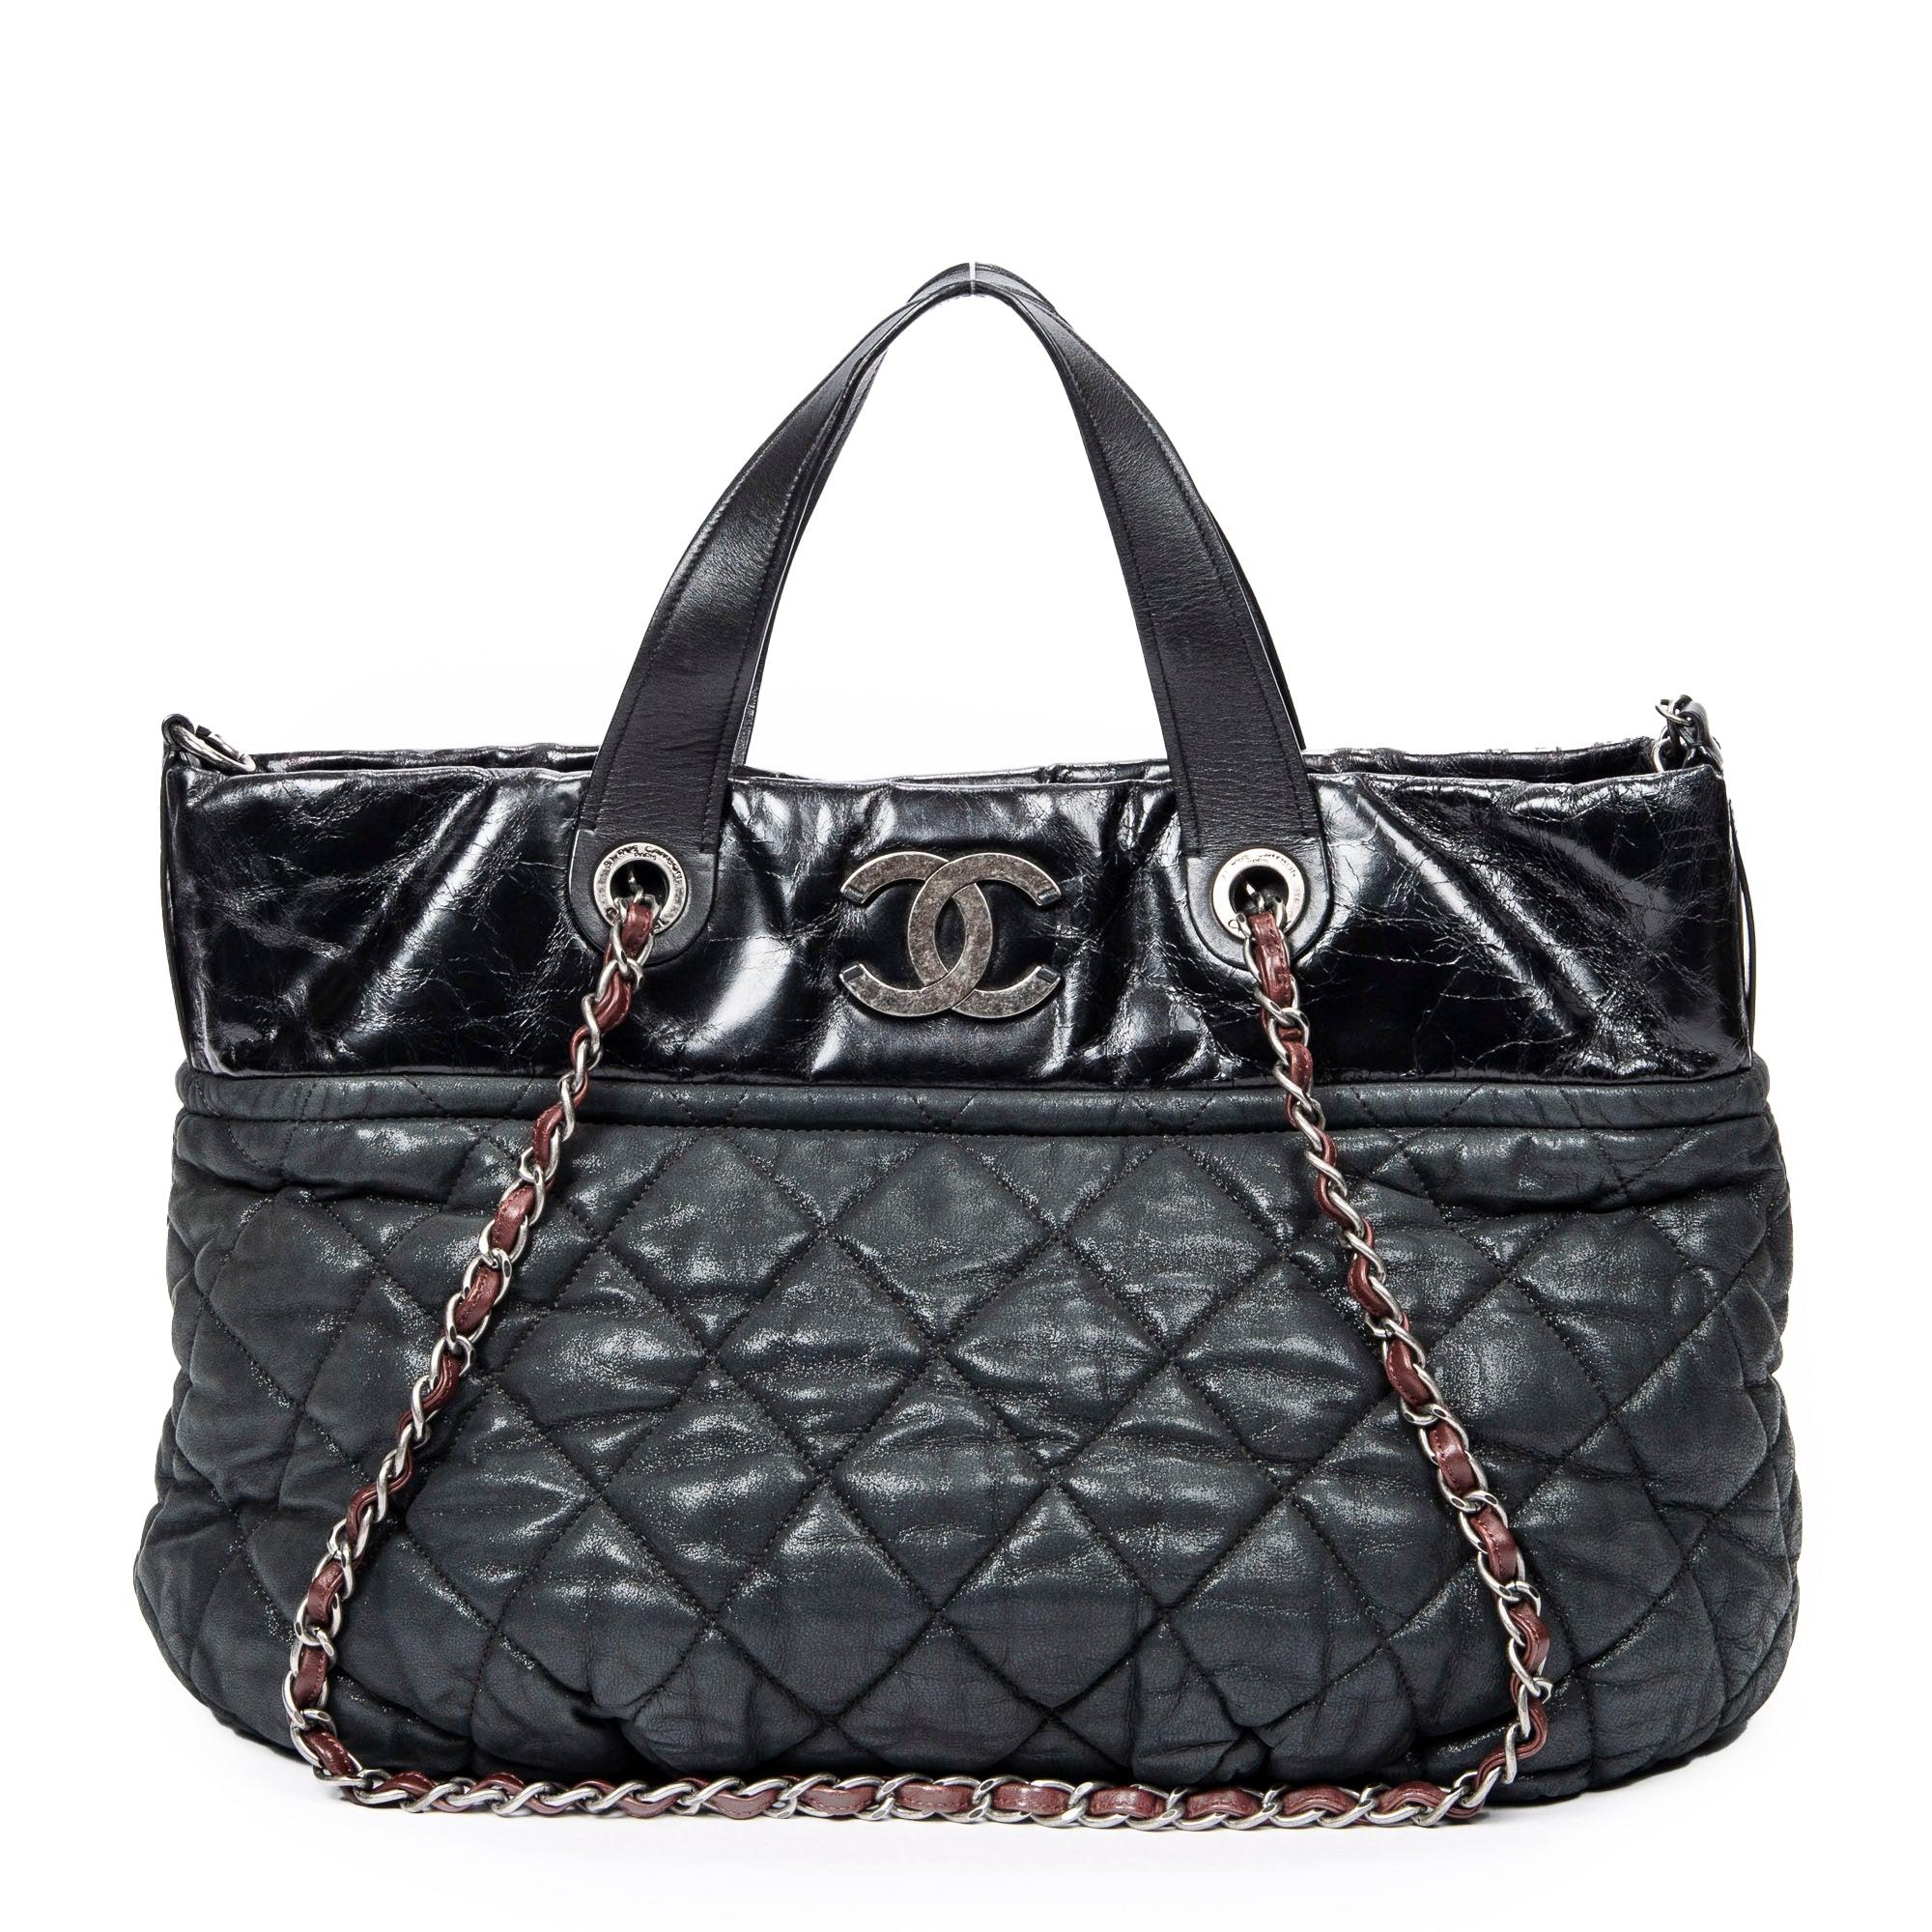 Chanel In-the-mix Tote in Black